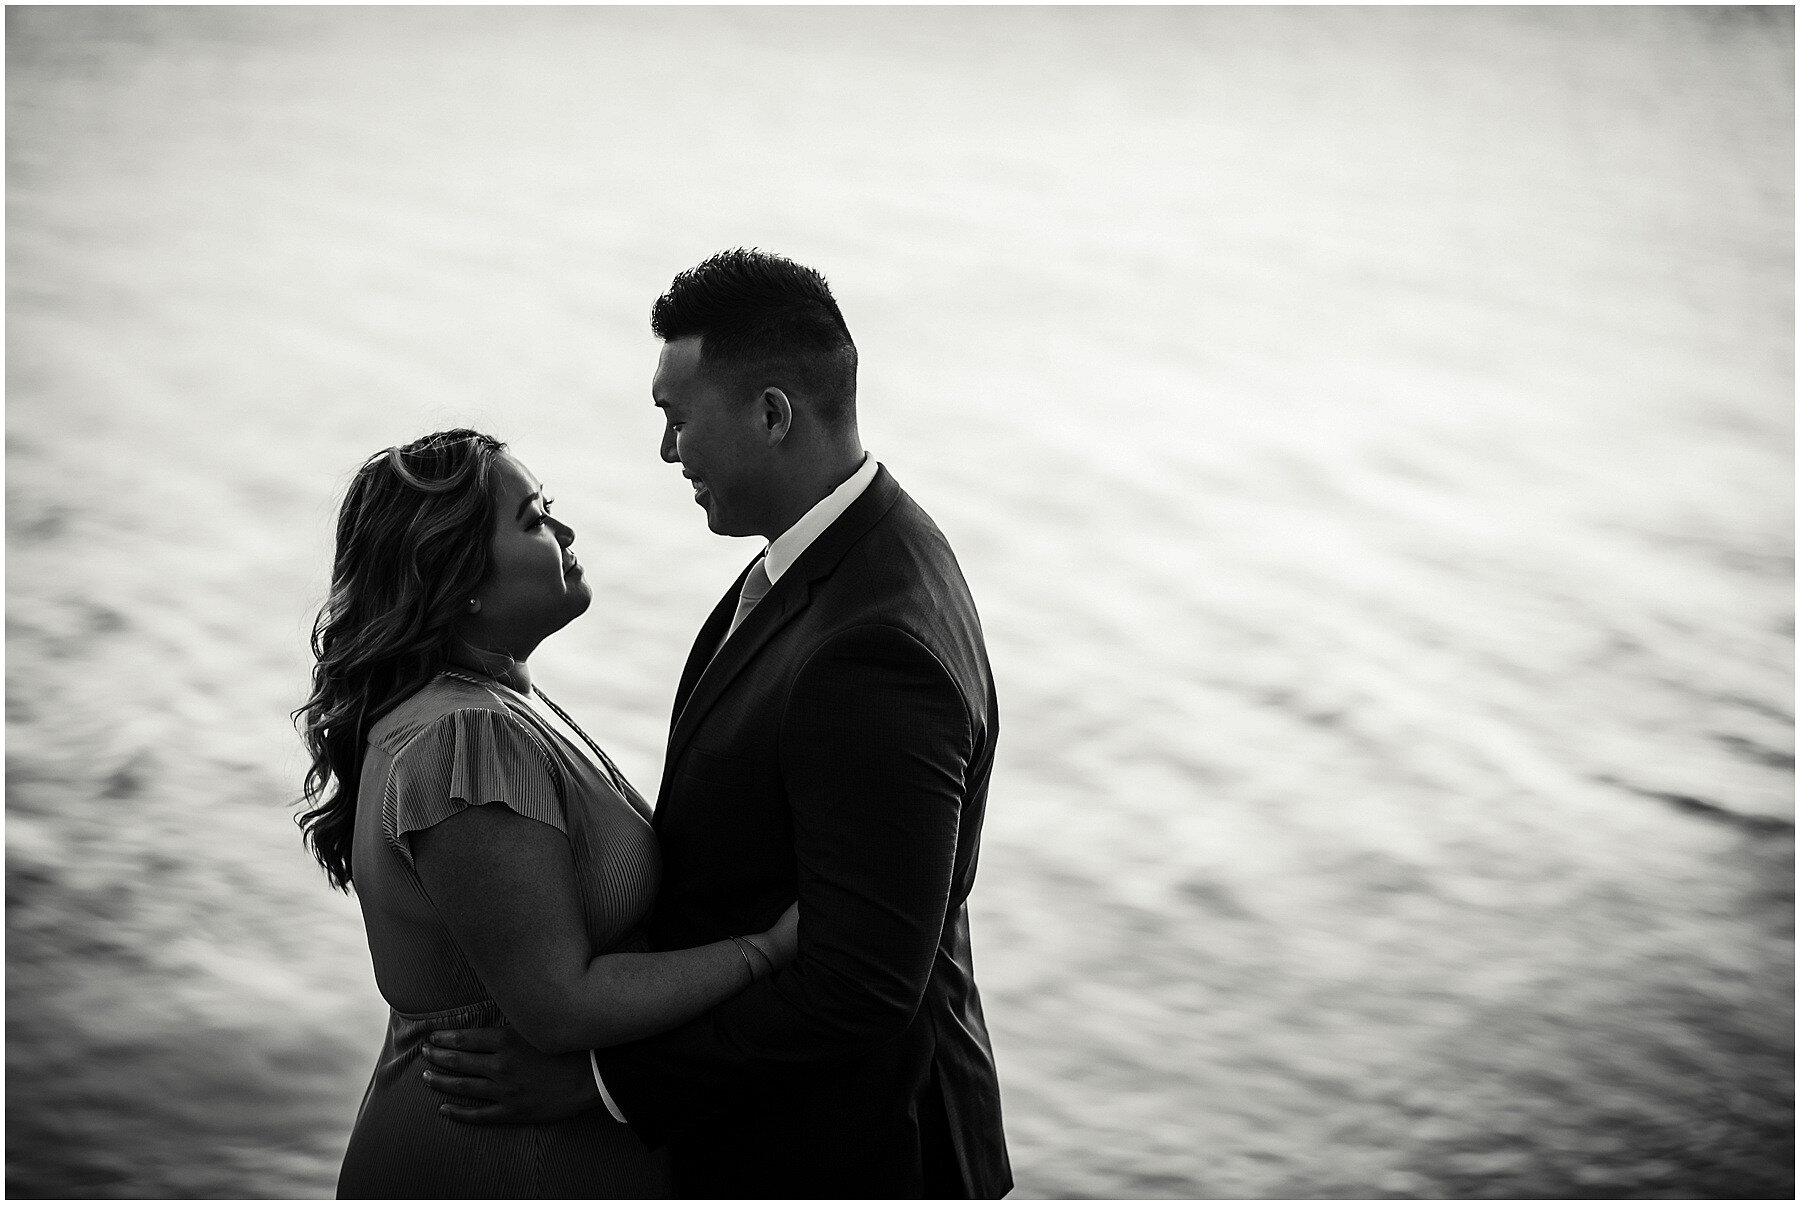 Romantic Chicago Sunrise Engagement Session captured by Inspired Eye Photography featured on CHI thee WED